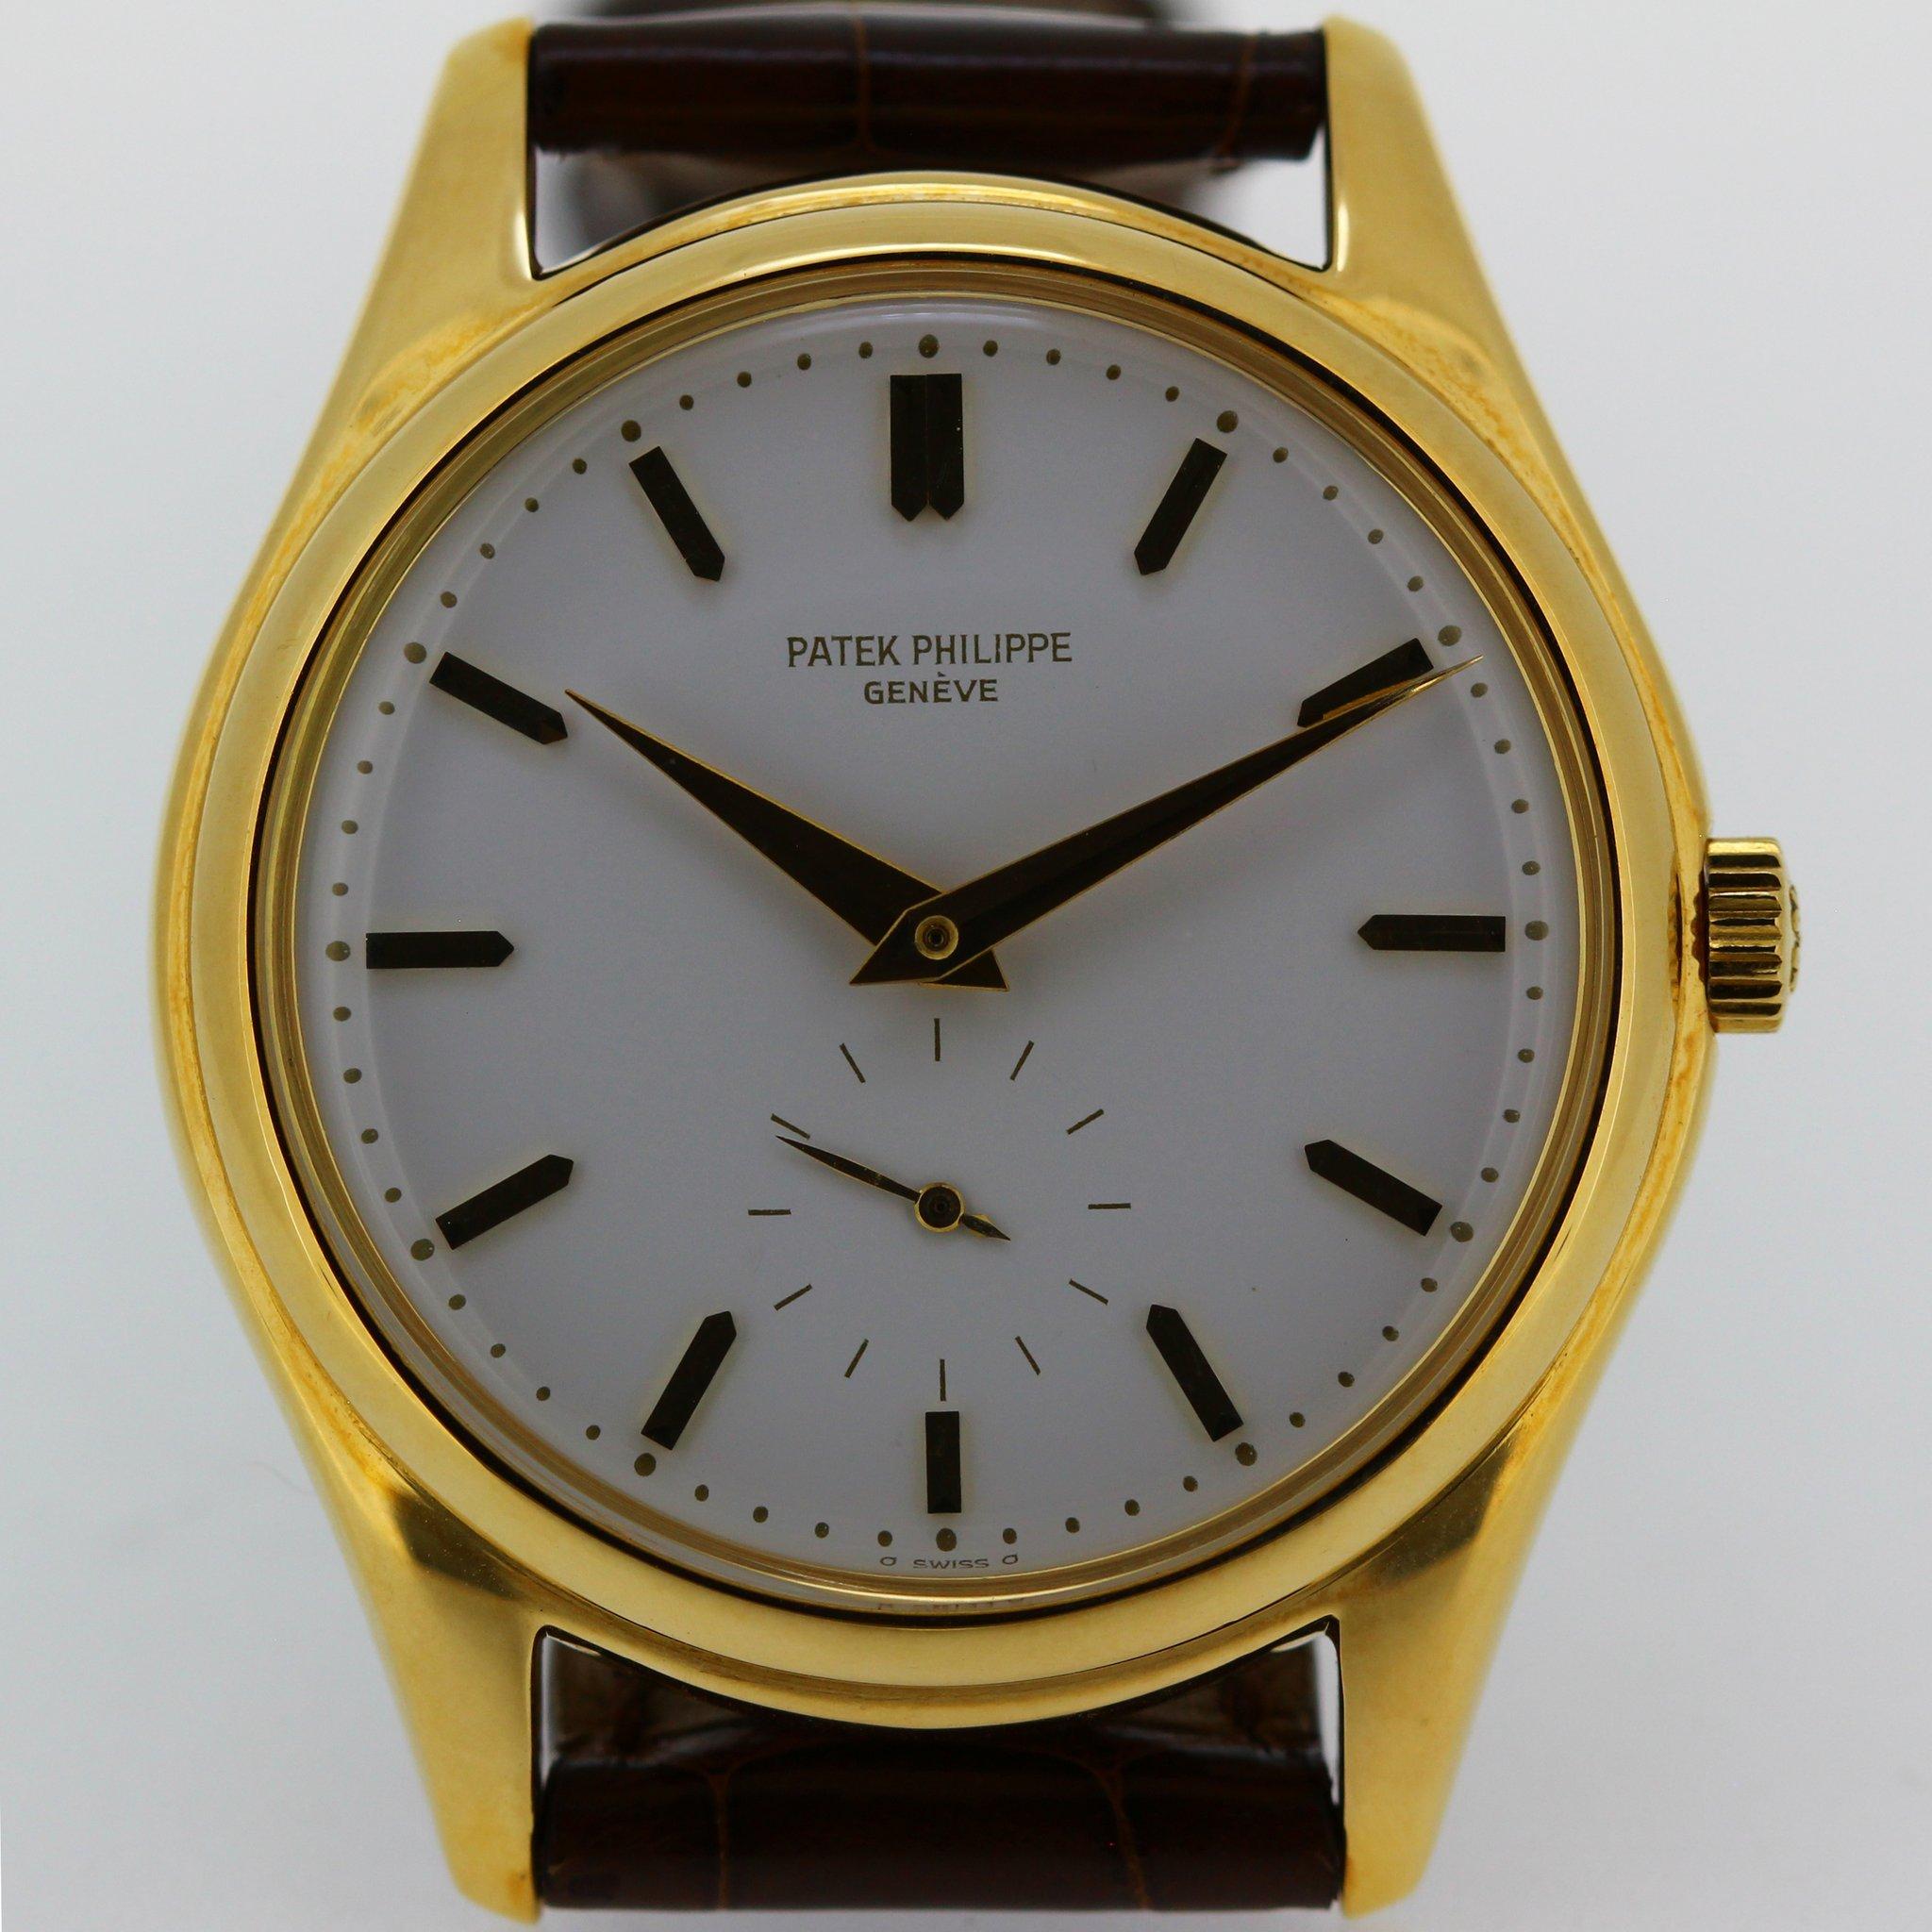 Patek Philippe 2526J Was Launched in 1953 and was the first automatic winding watch that Patek made, and is considered to be the ultimate Vintage Patek Calatrava Watch.

Enamel dial, Screw down back, water resistant case.
35 mm in diameter

12